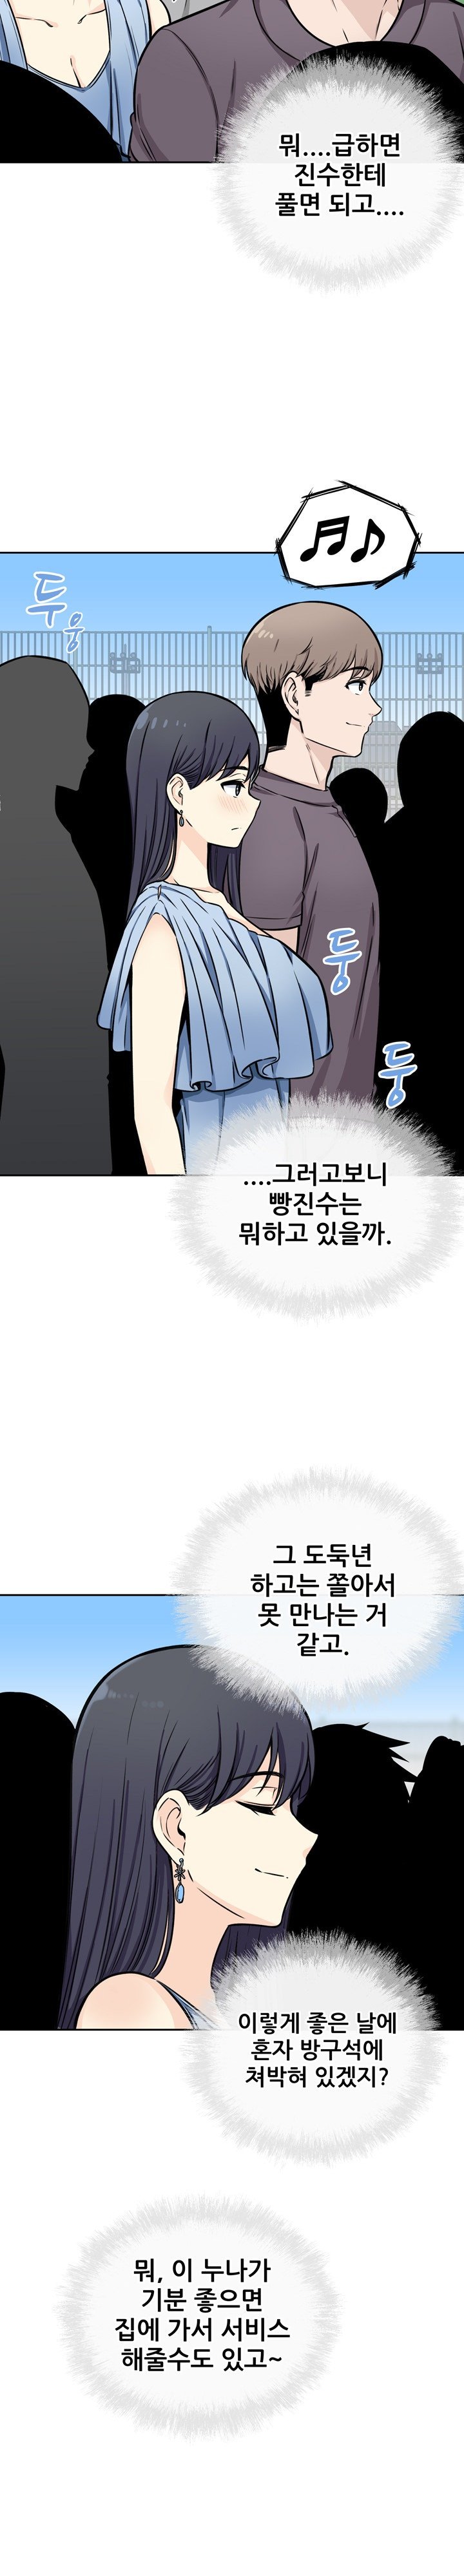 the-ark-is-me-raw-chap-38-20